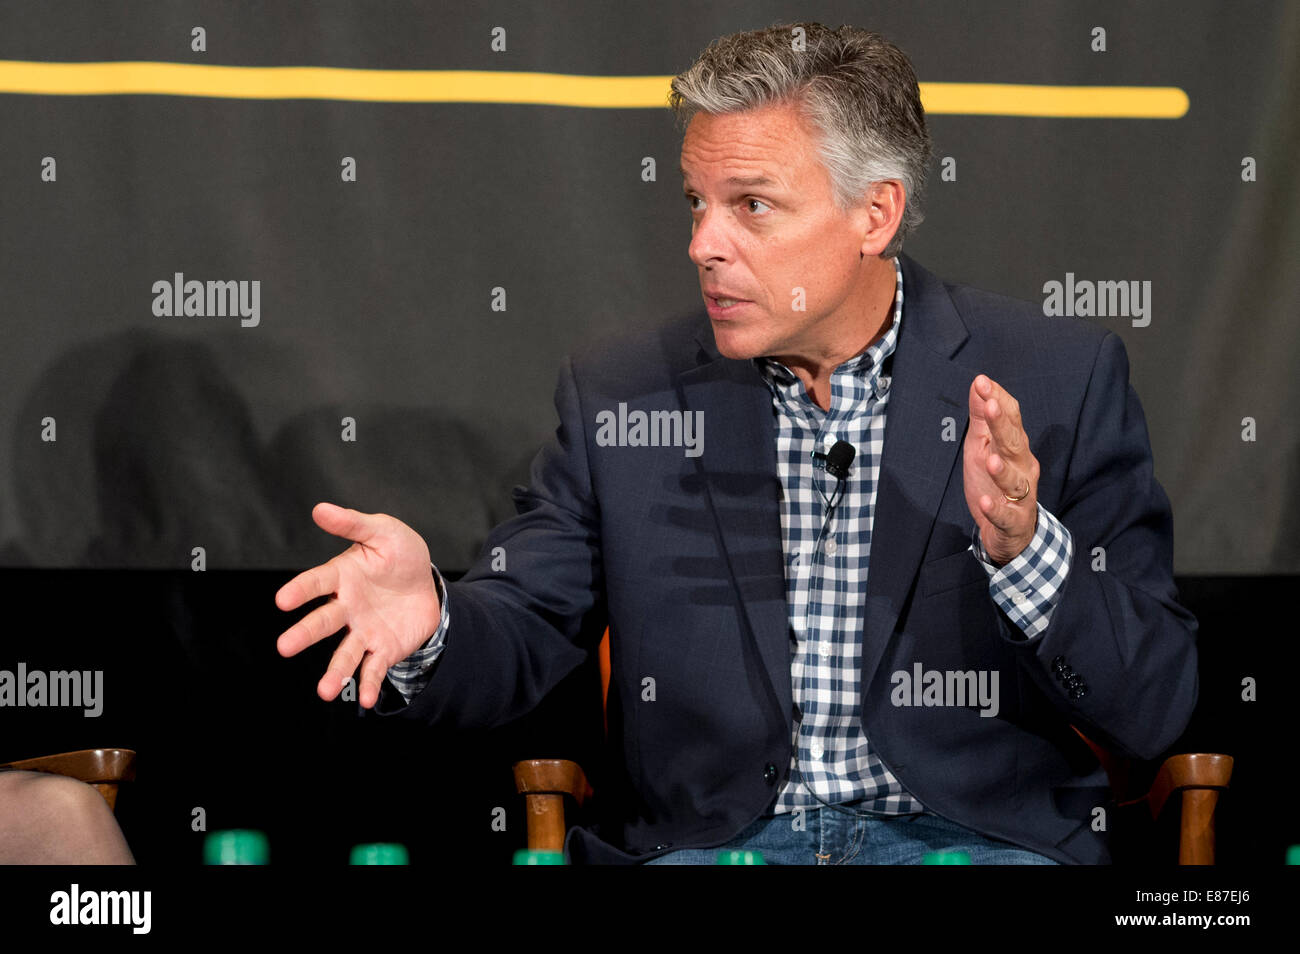 Former U.S. Ambassador to China and presidential candidate Jon M. Huntsman speaks at a panel in Austin, Texas Stock Photo